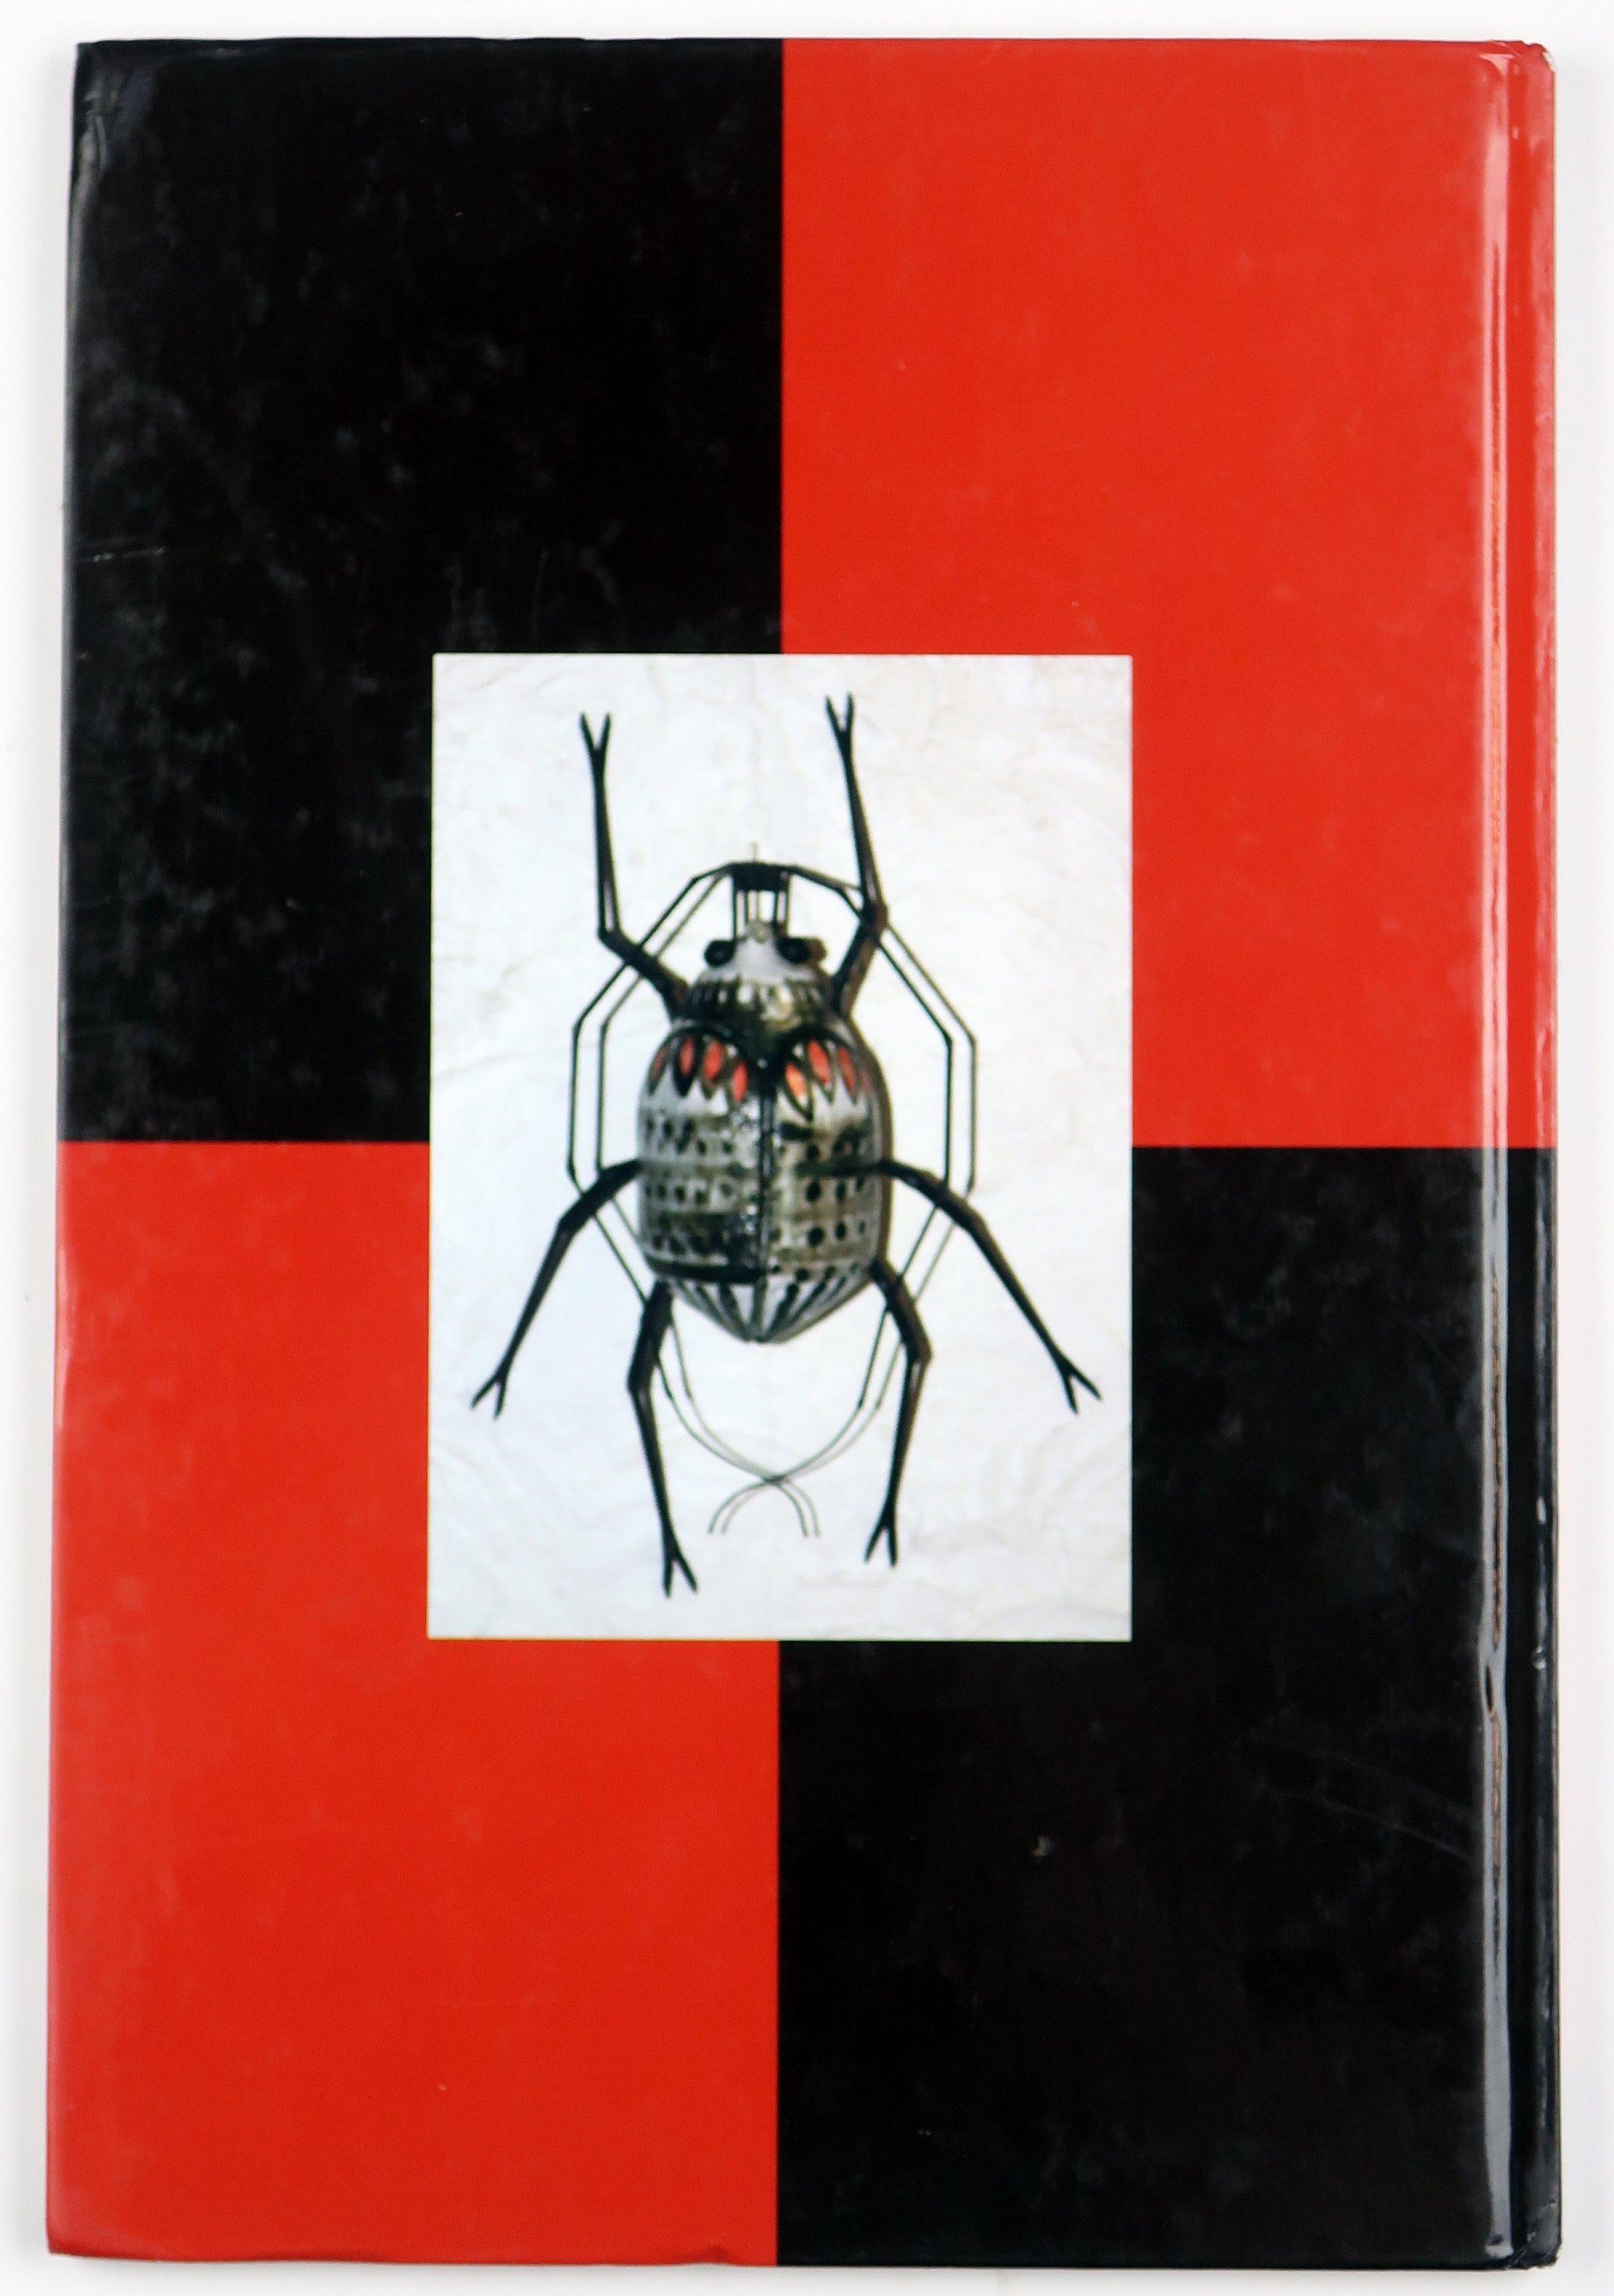 A monograph by Marie-Pacale Suhard whose title translates to 